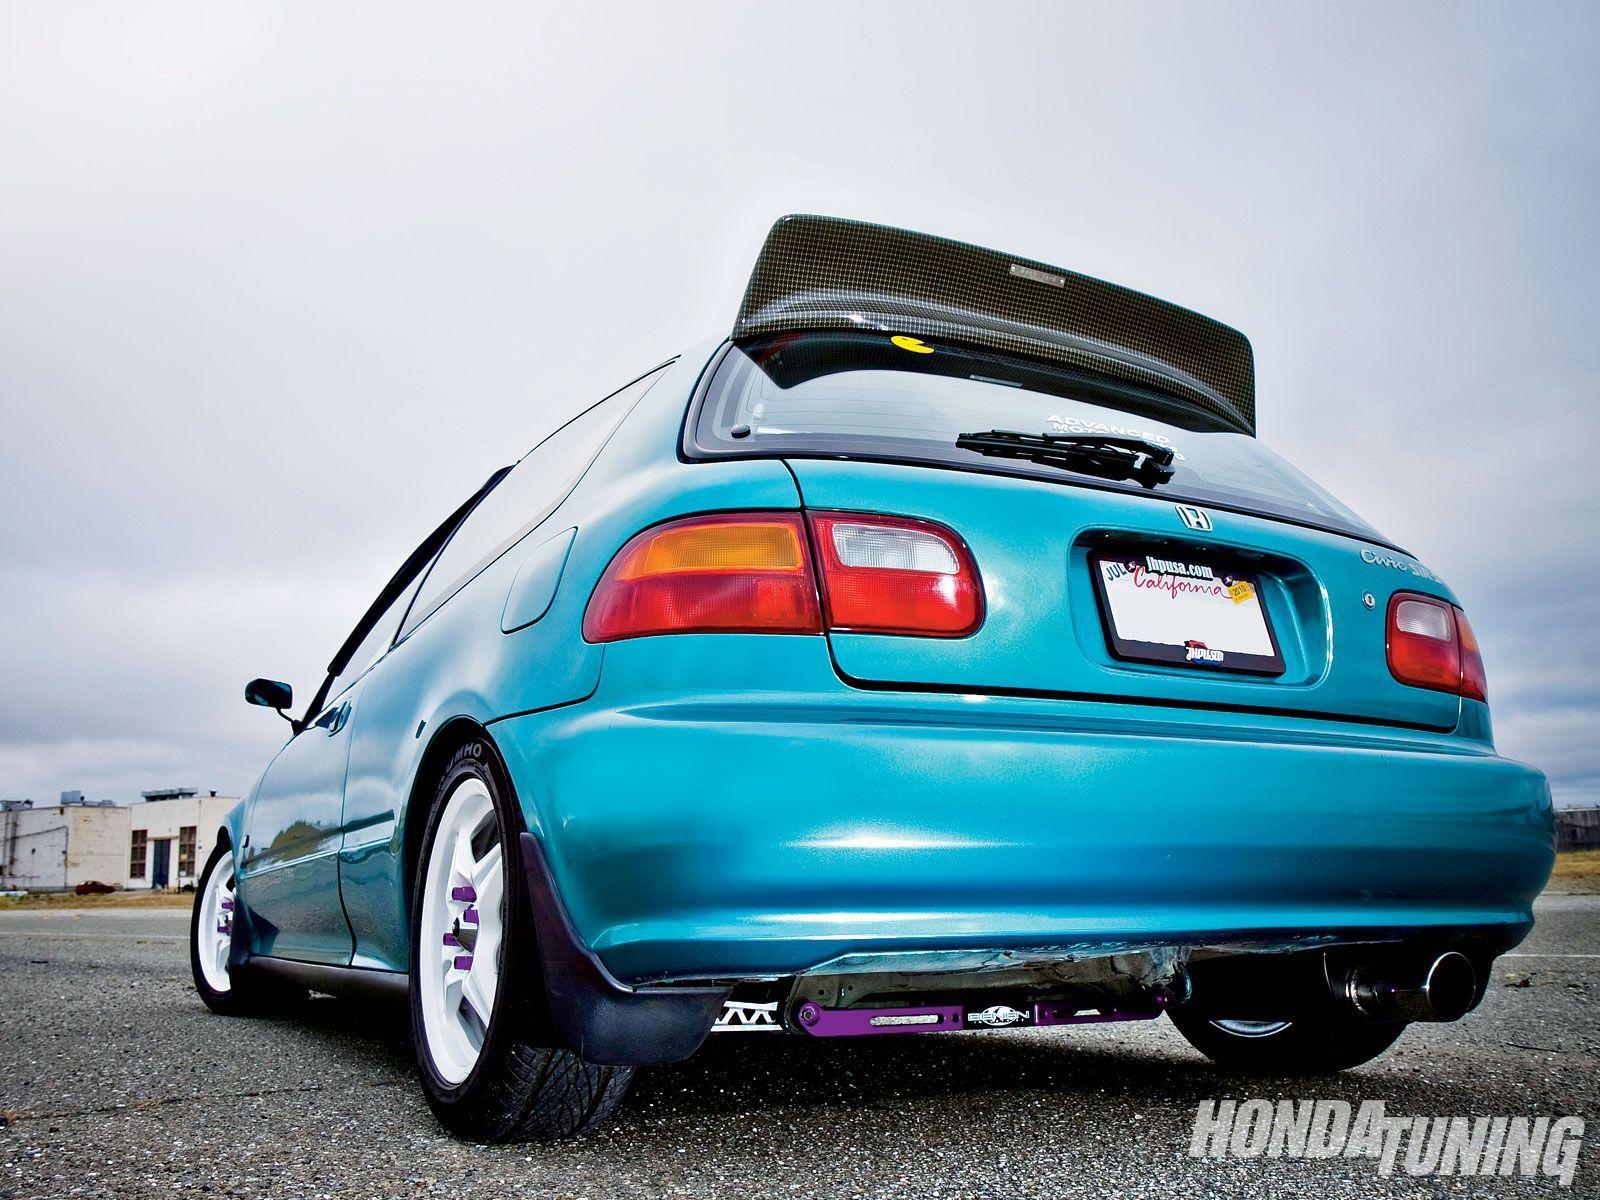 Honda Civic Hatchback Stand Out Photo & Image Gallery